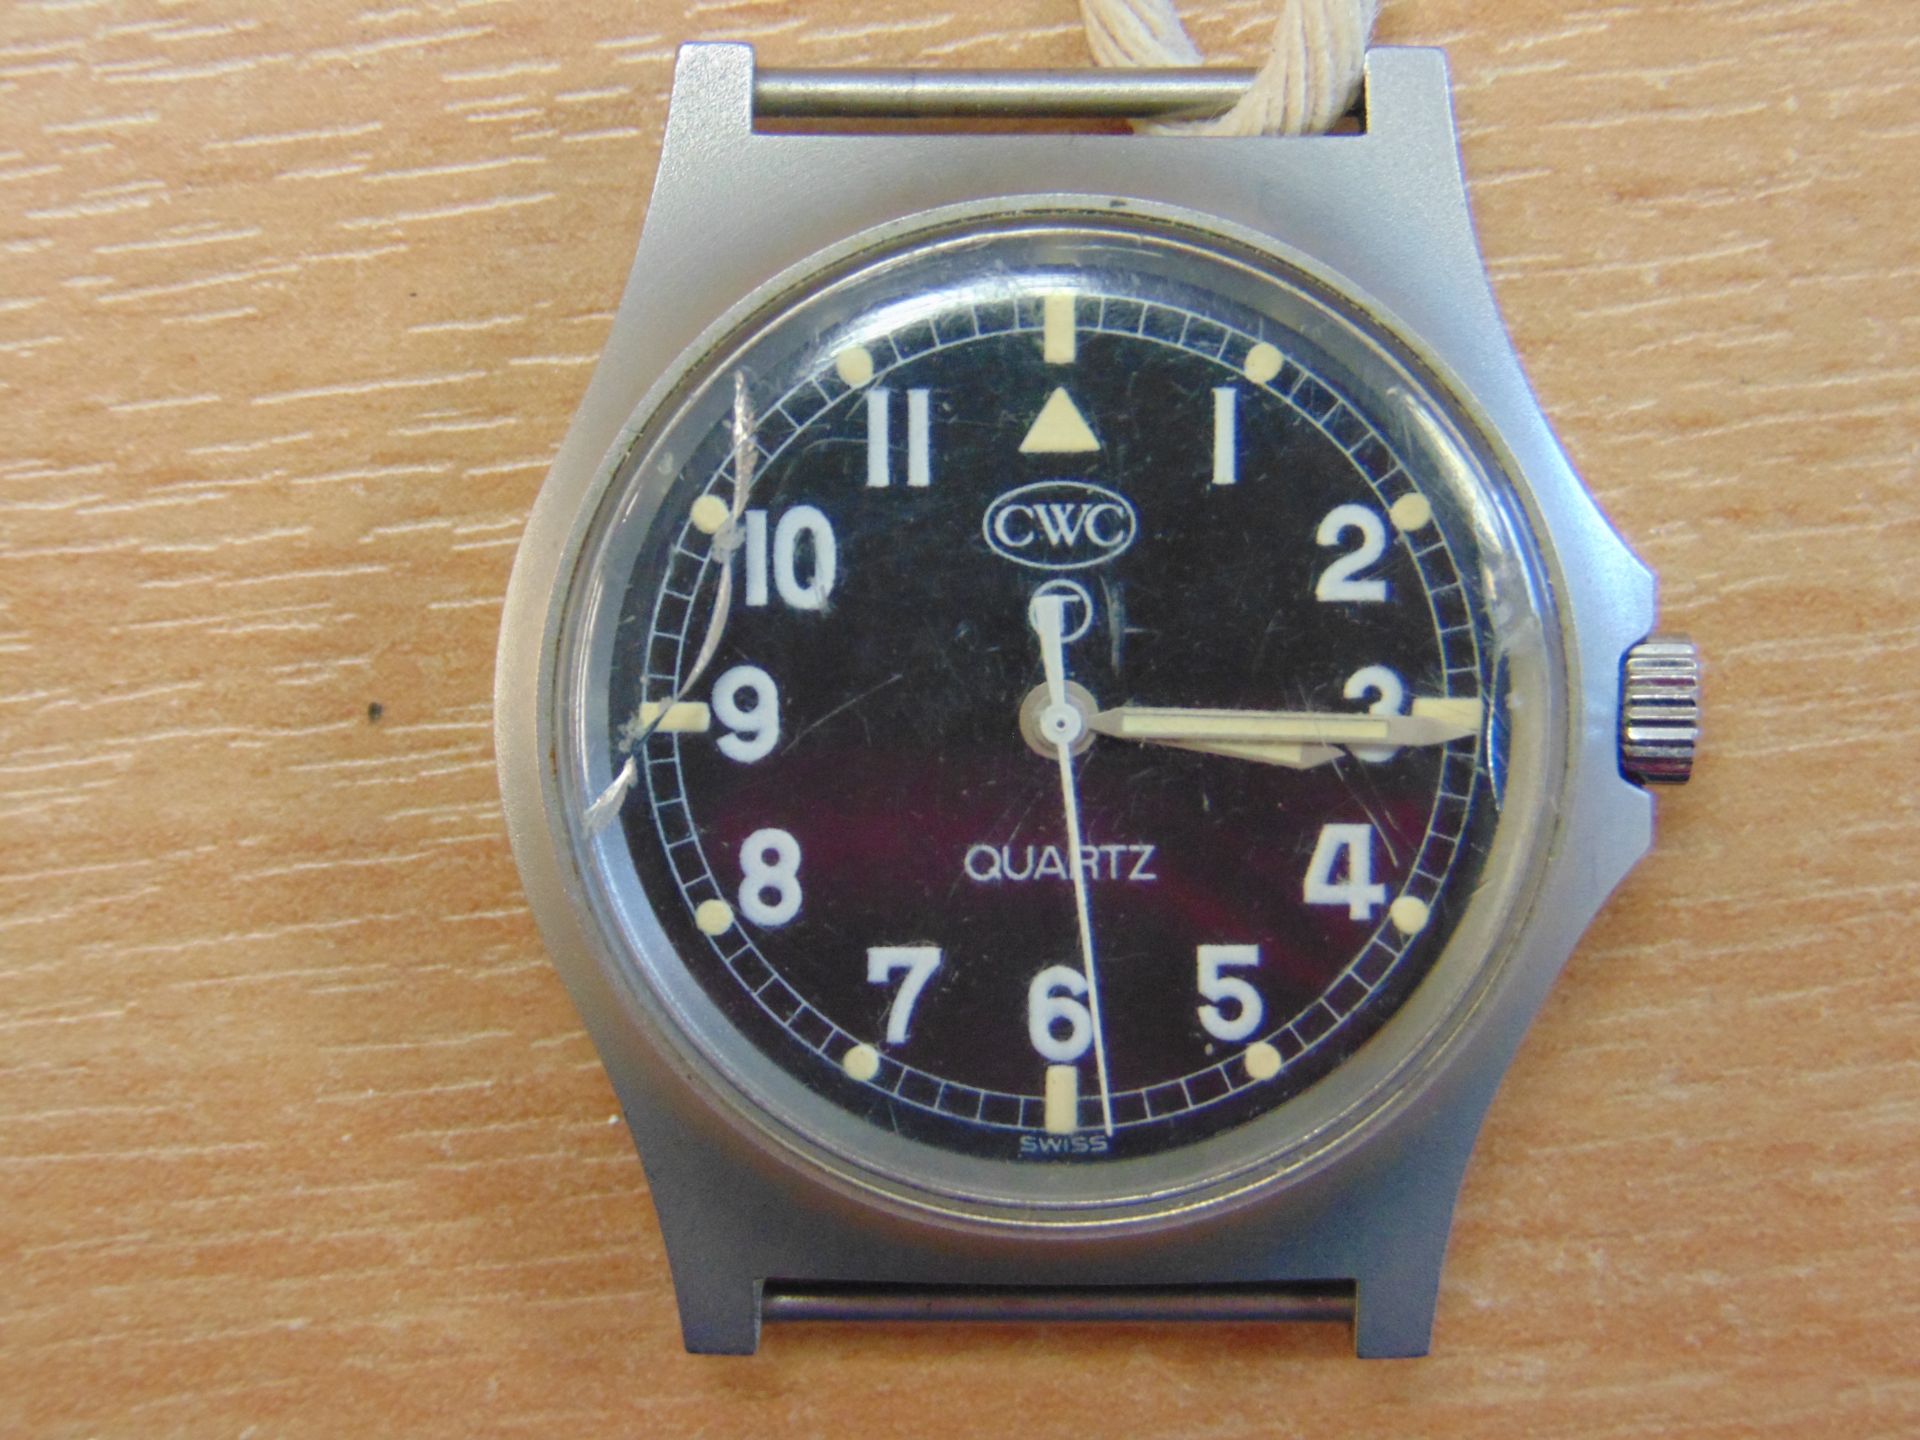 CWC W10 BRITISH ARMY SERVICE WATCH FAT BOY CASE SN.18922 IN ORIGINAL PACKING- SMALL CHIP IN GLASS